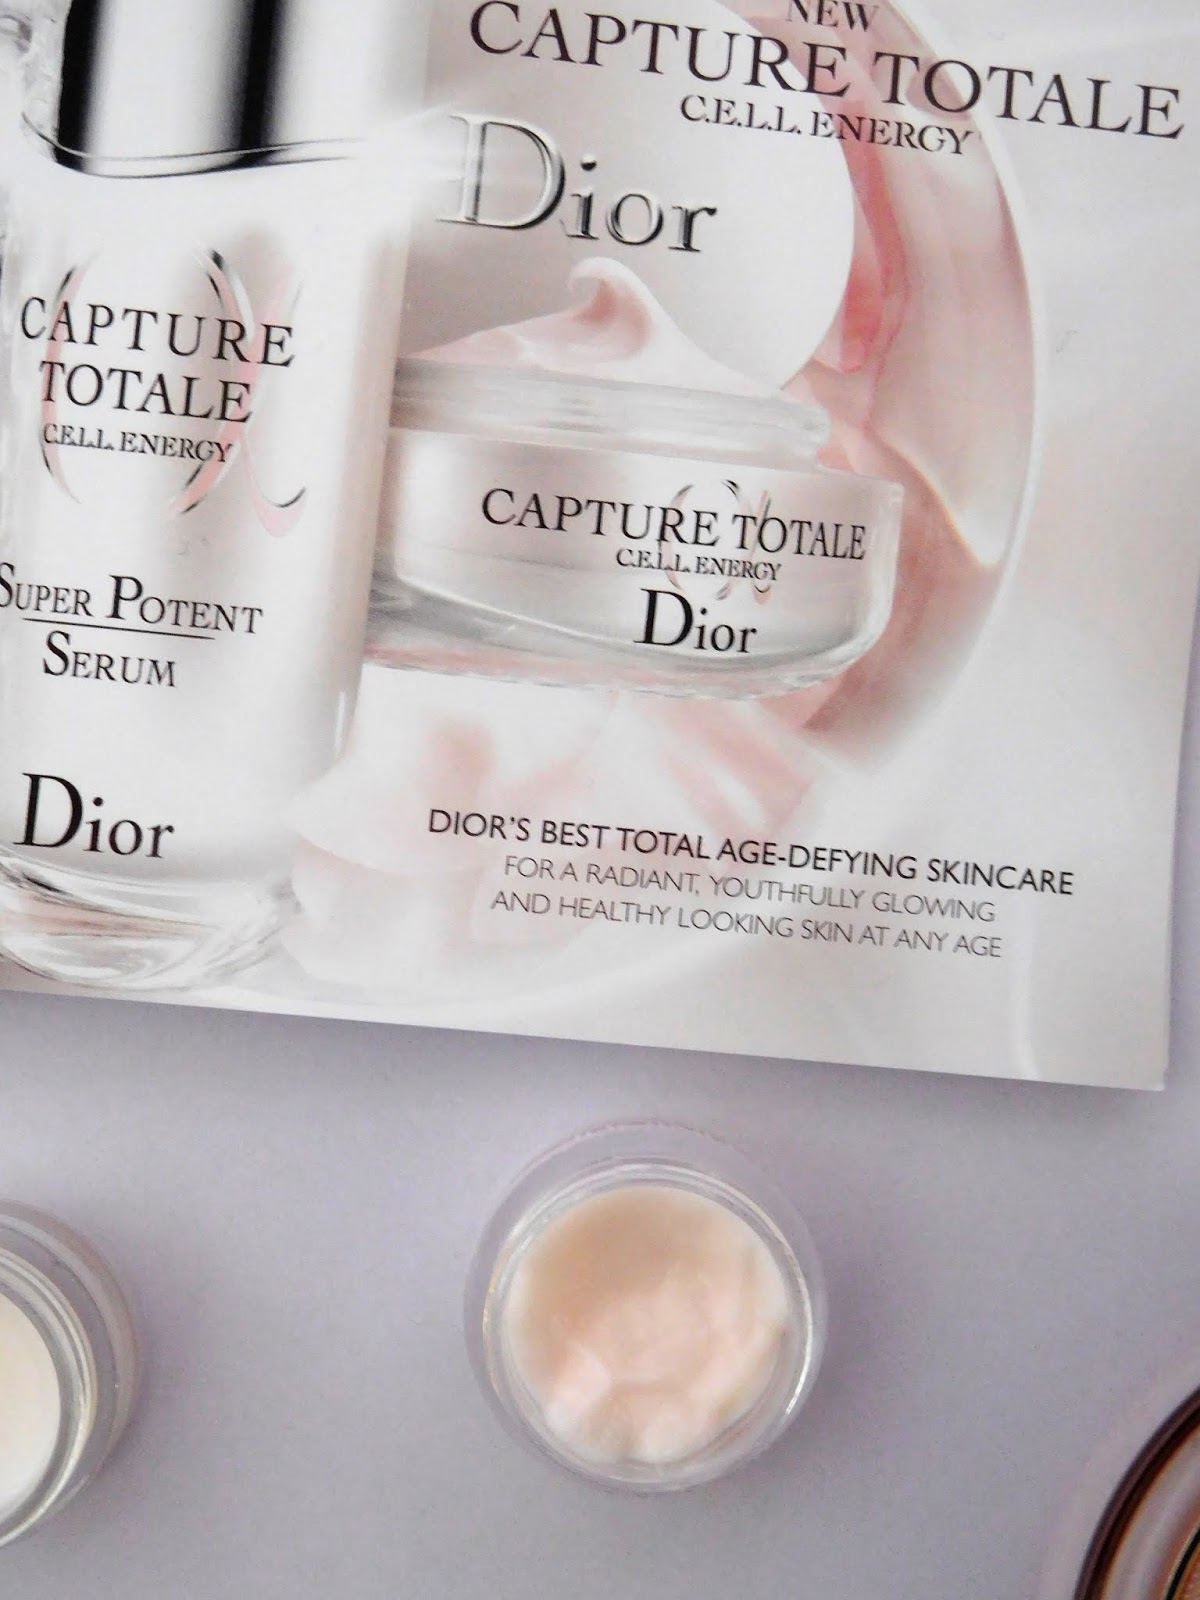 capture totale dior review